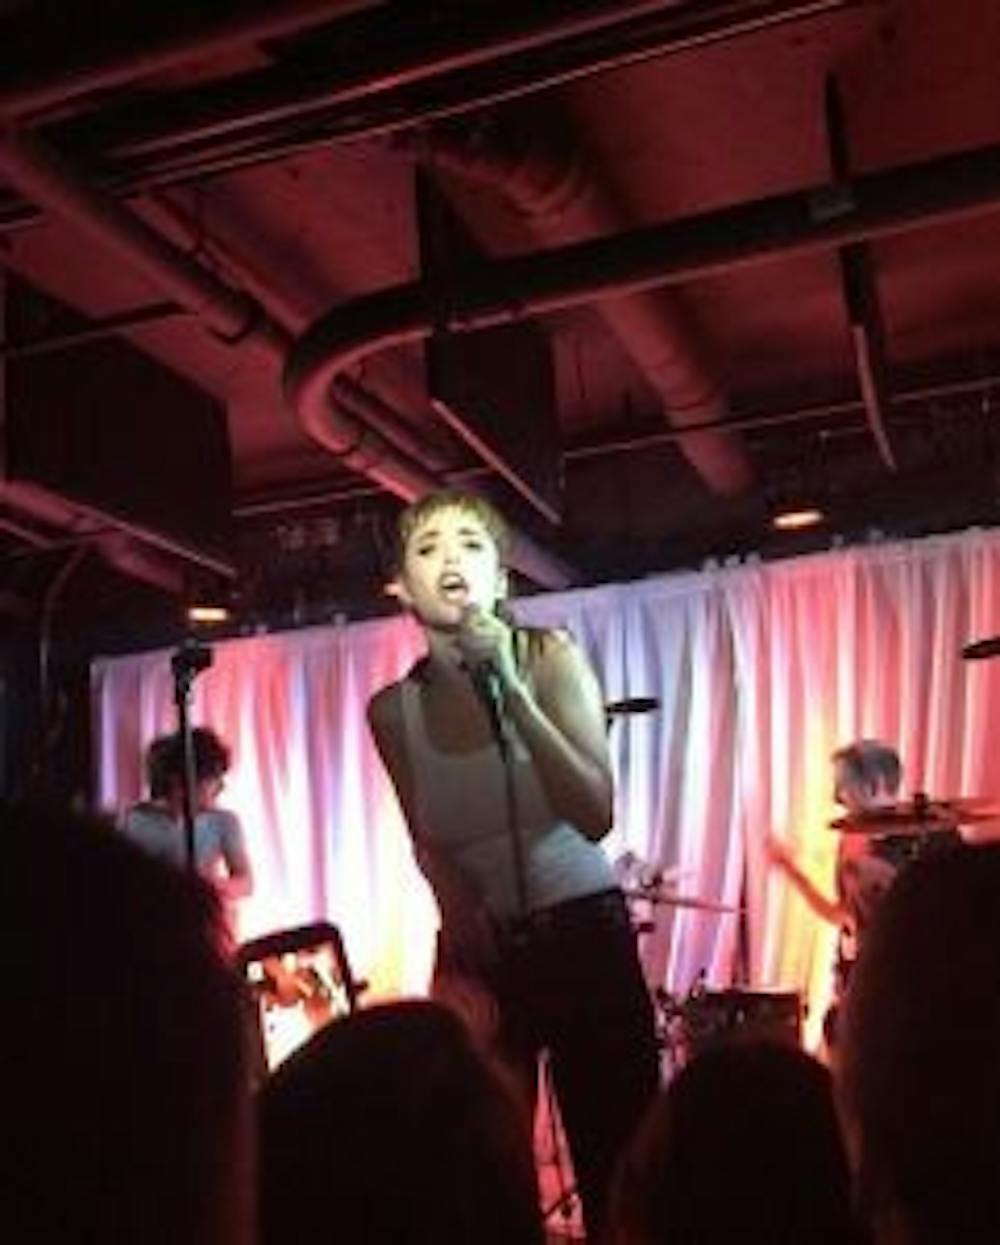  COURTESY OF EMILY HERMAN
 Ryn Weaver performed tracks from her debut album The Fool at her sold-out Washington D.C. show on July 24.